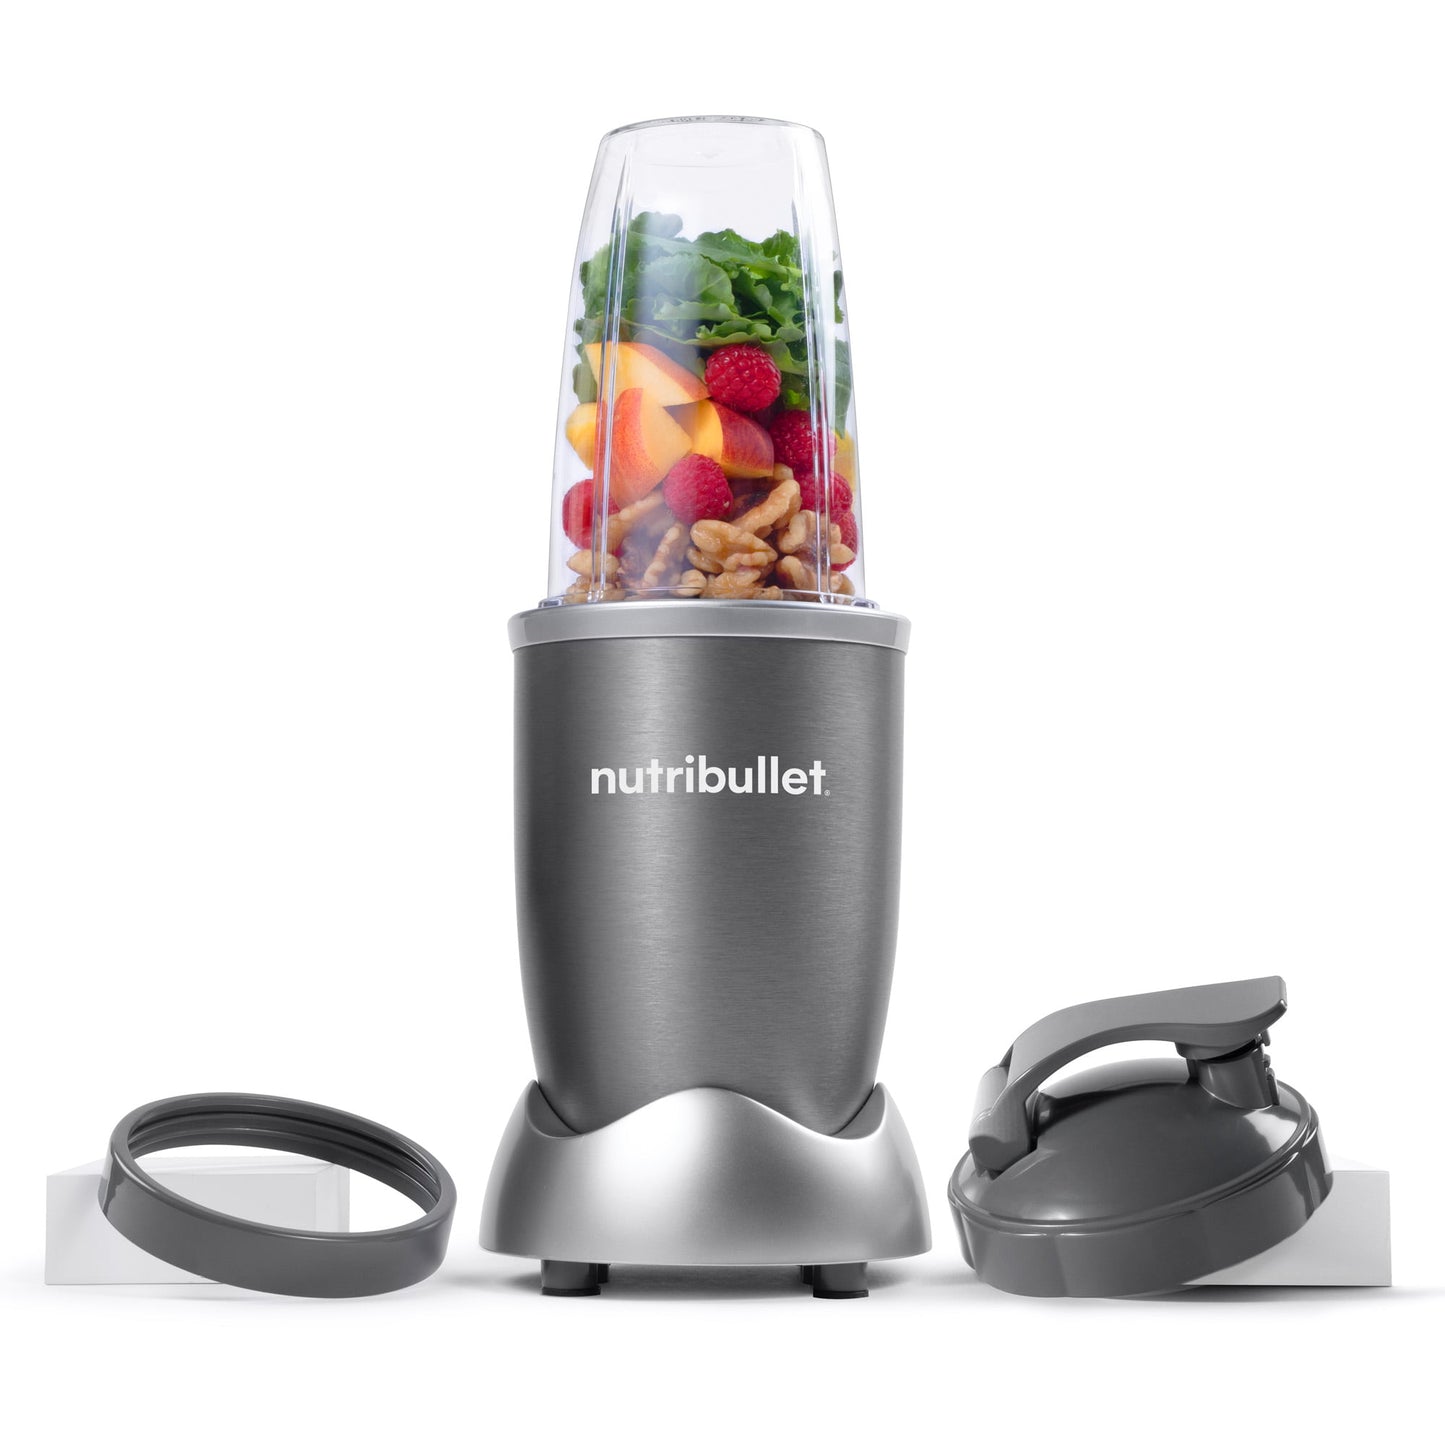 NutriBullet 600 Watt Personal Blender: A Powerful and Convenient Way to Blend Your Way to Health